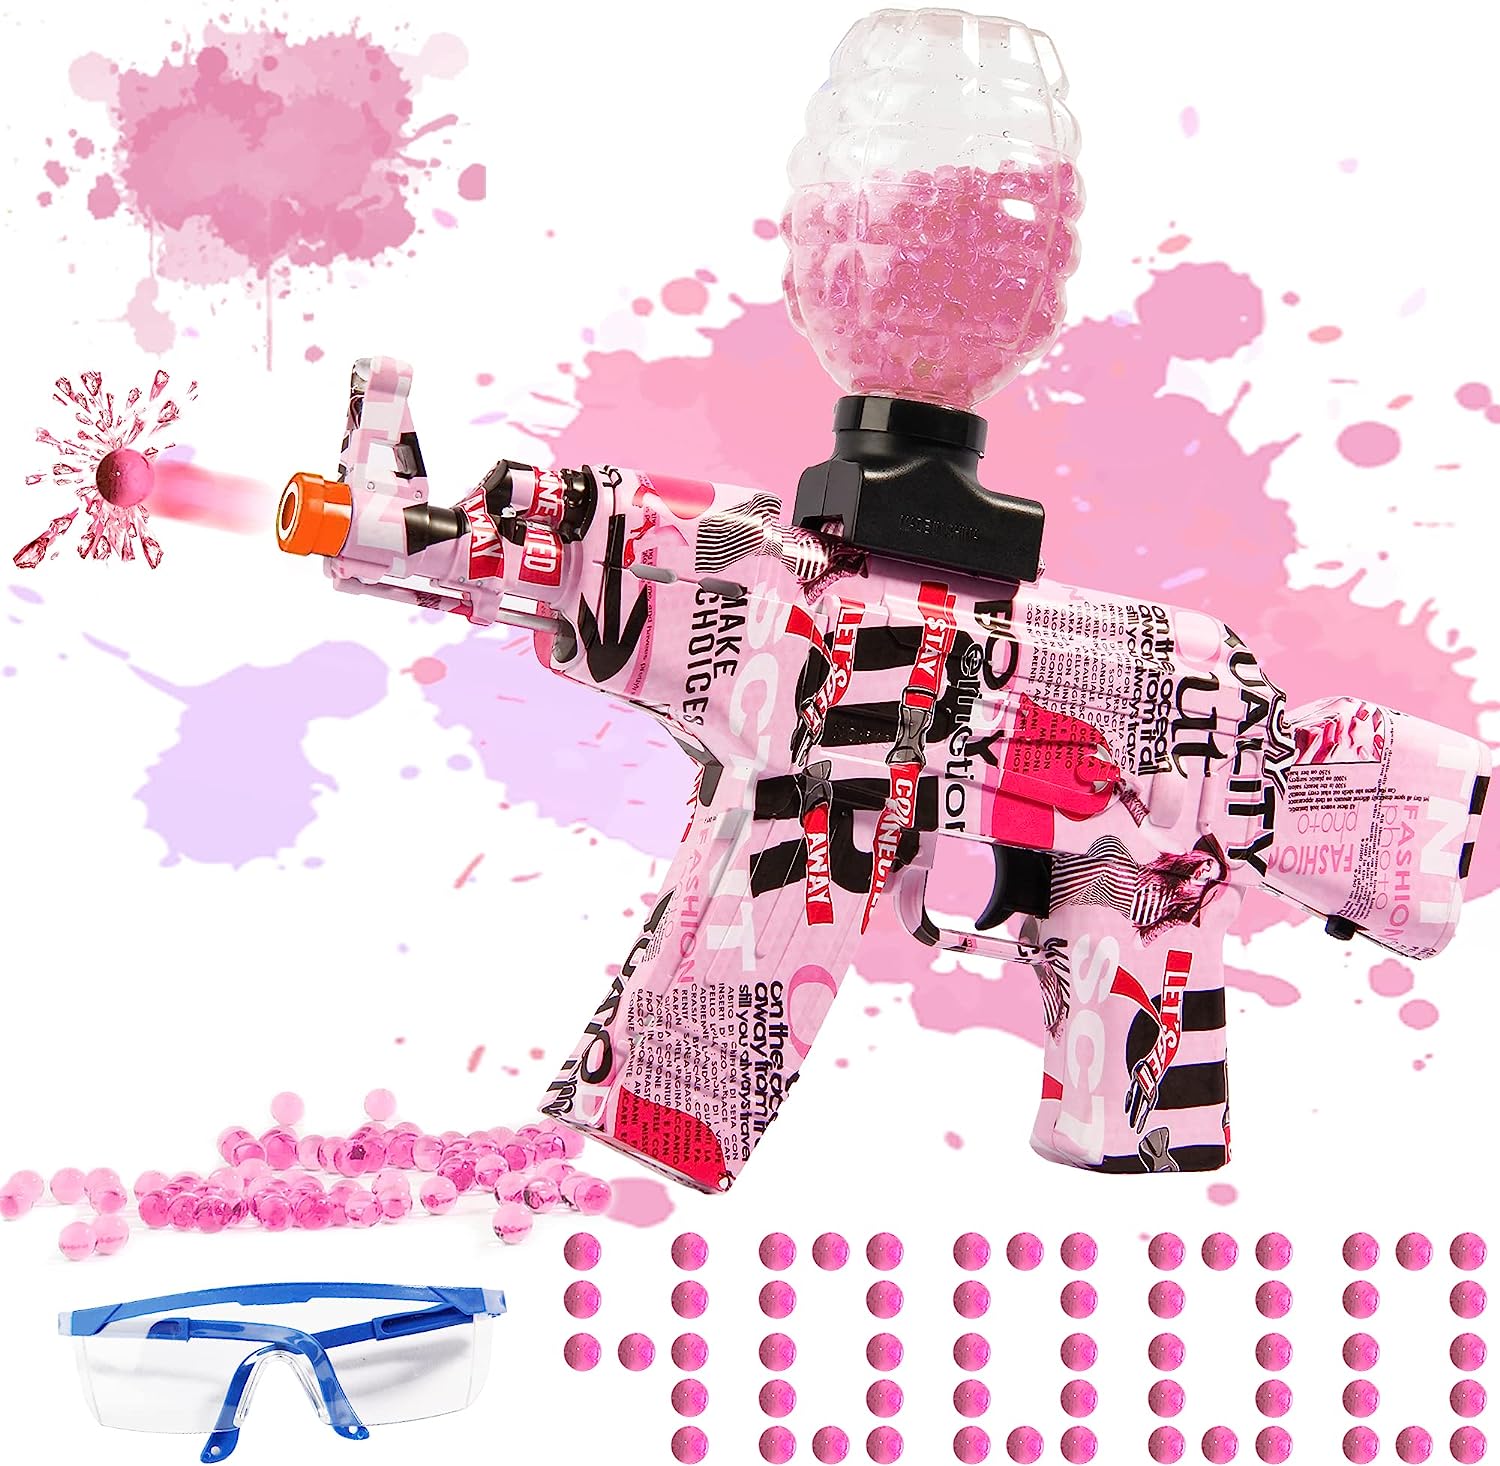 An Automatic Pink Orbeez Gun with 40000+ Water Beads and Goggles, for Outdoor Activities